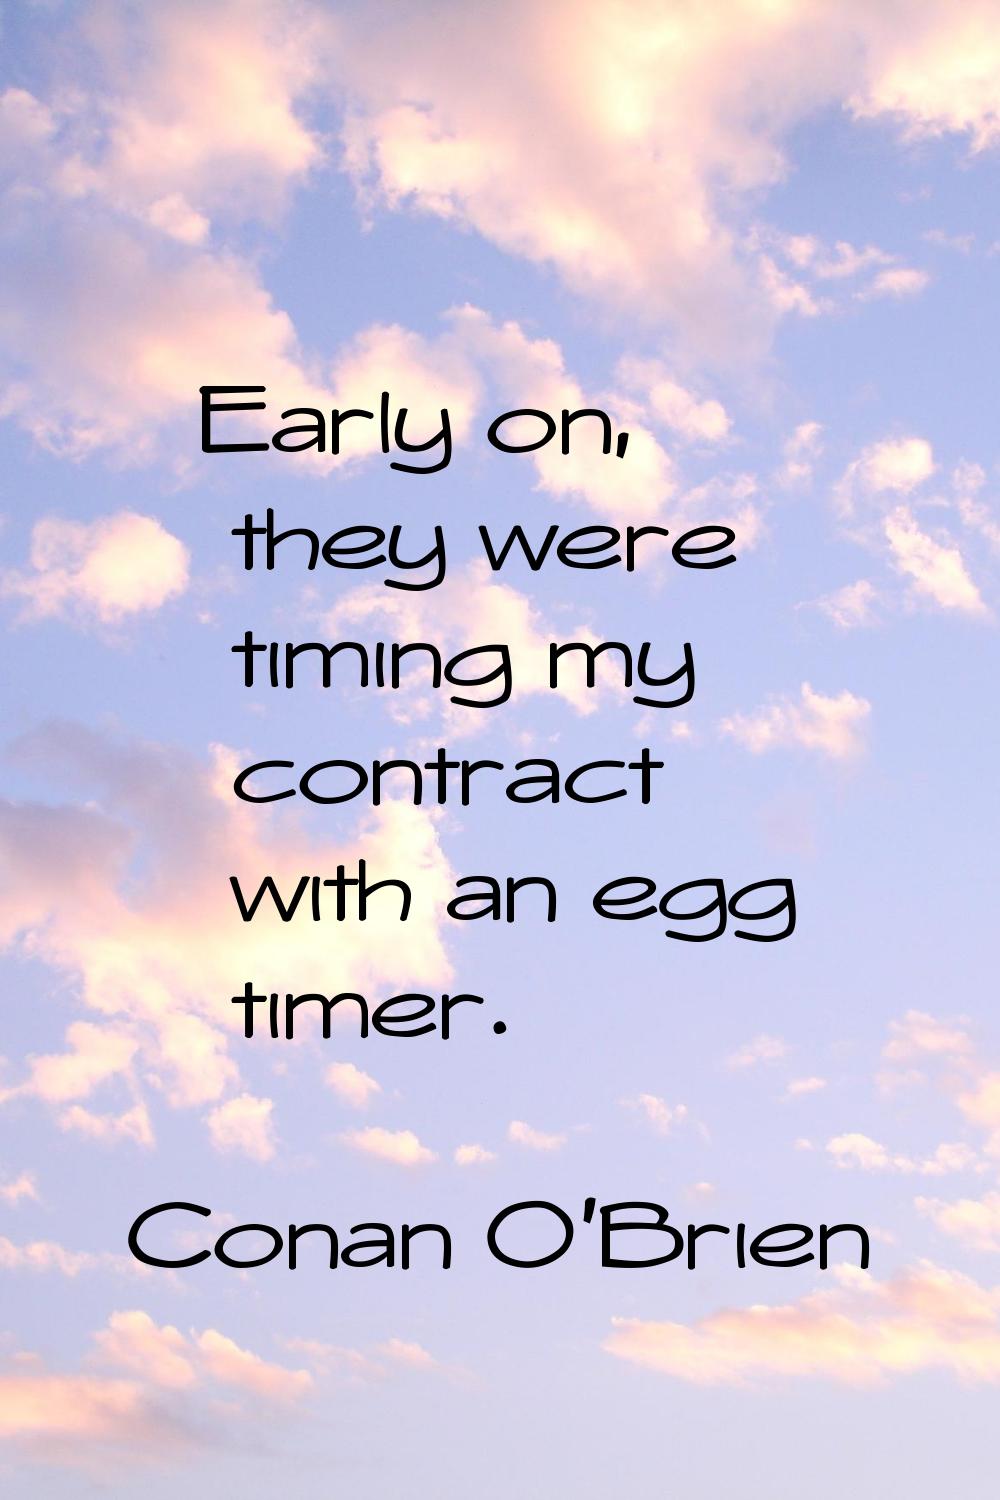 Early on, they were timing my contract with an egg timer.